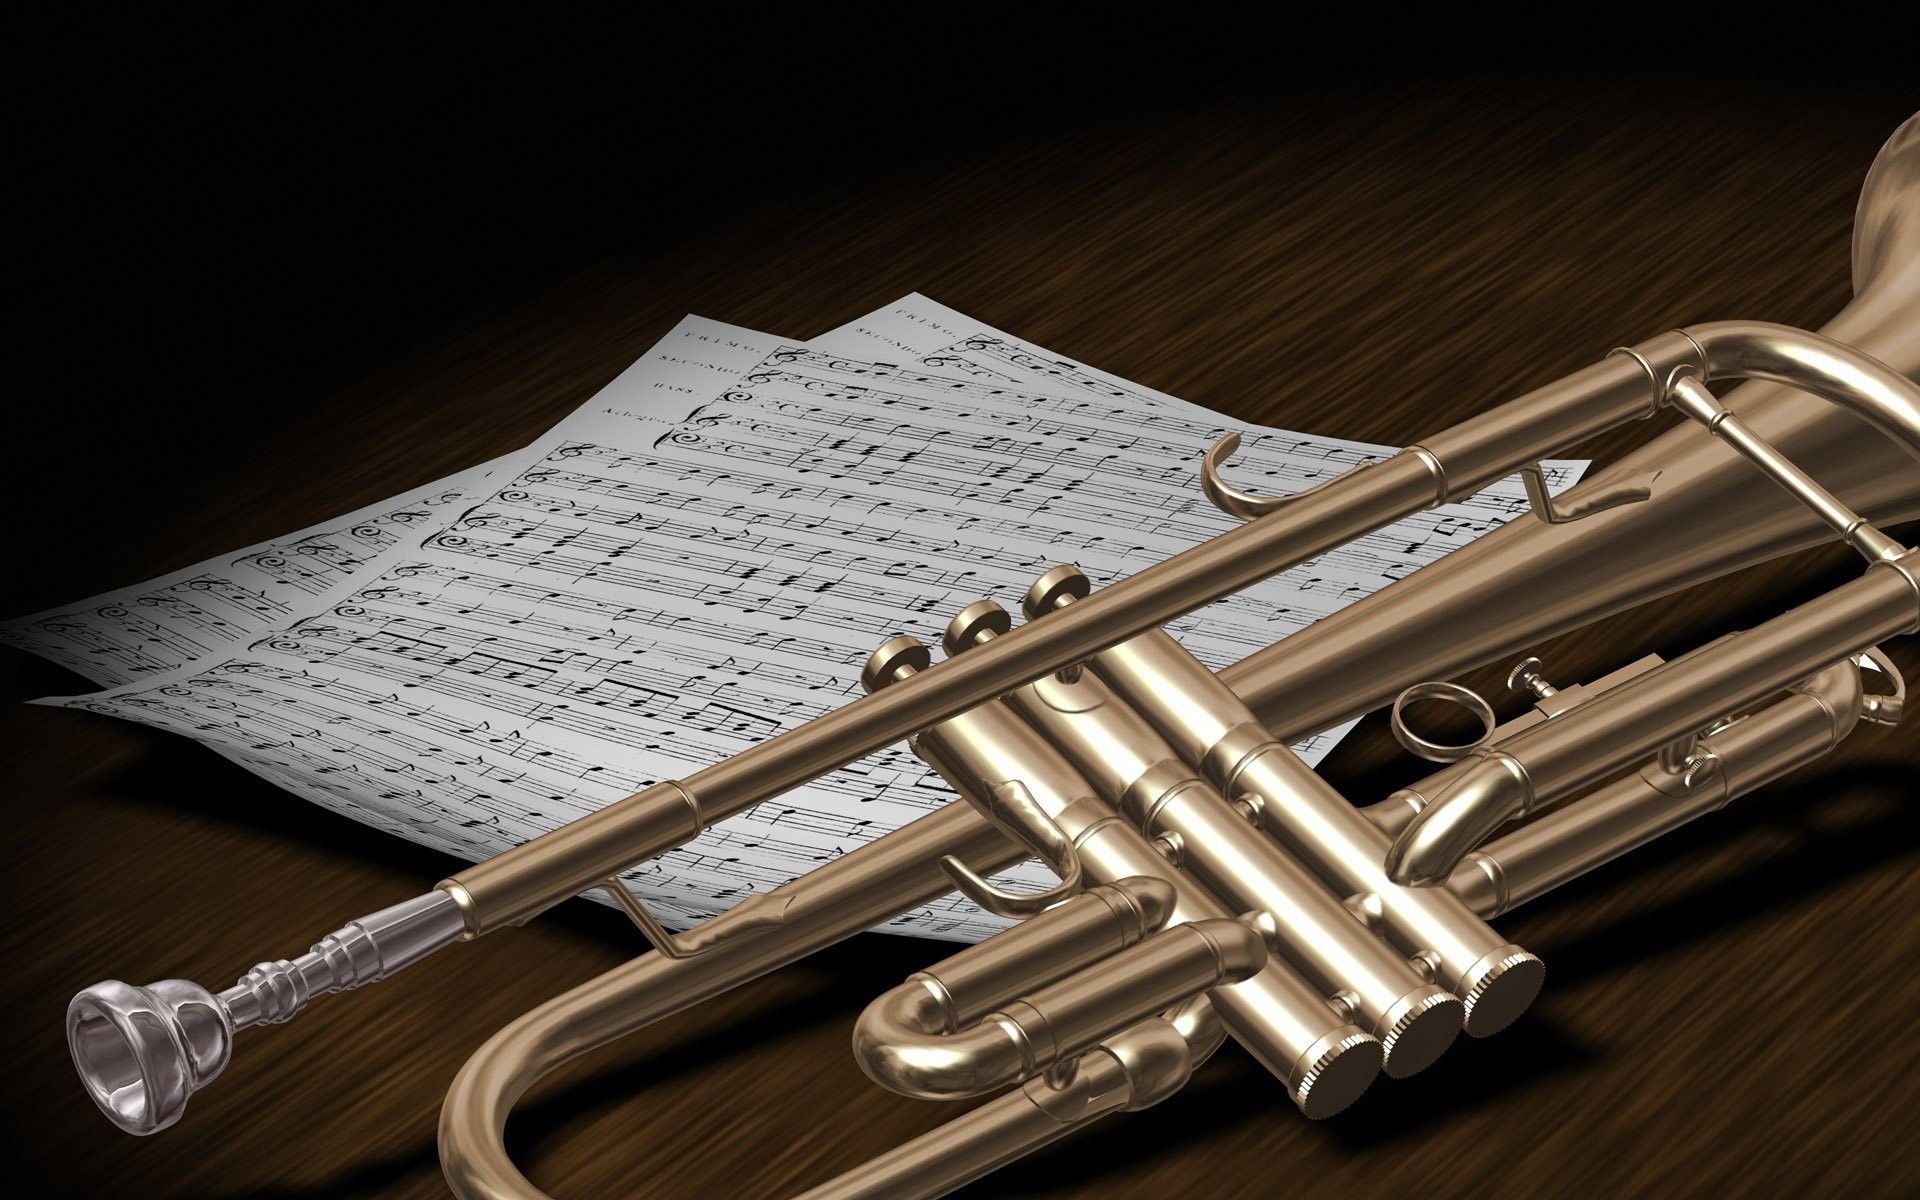 Trumpet: Music notes, The keys, The valves to change the pitch, Playing technique, Single, double and triple tonguing. 1920x1200 HD Background.